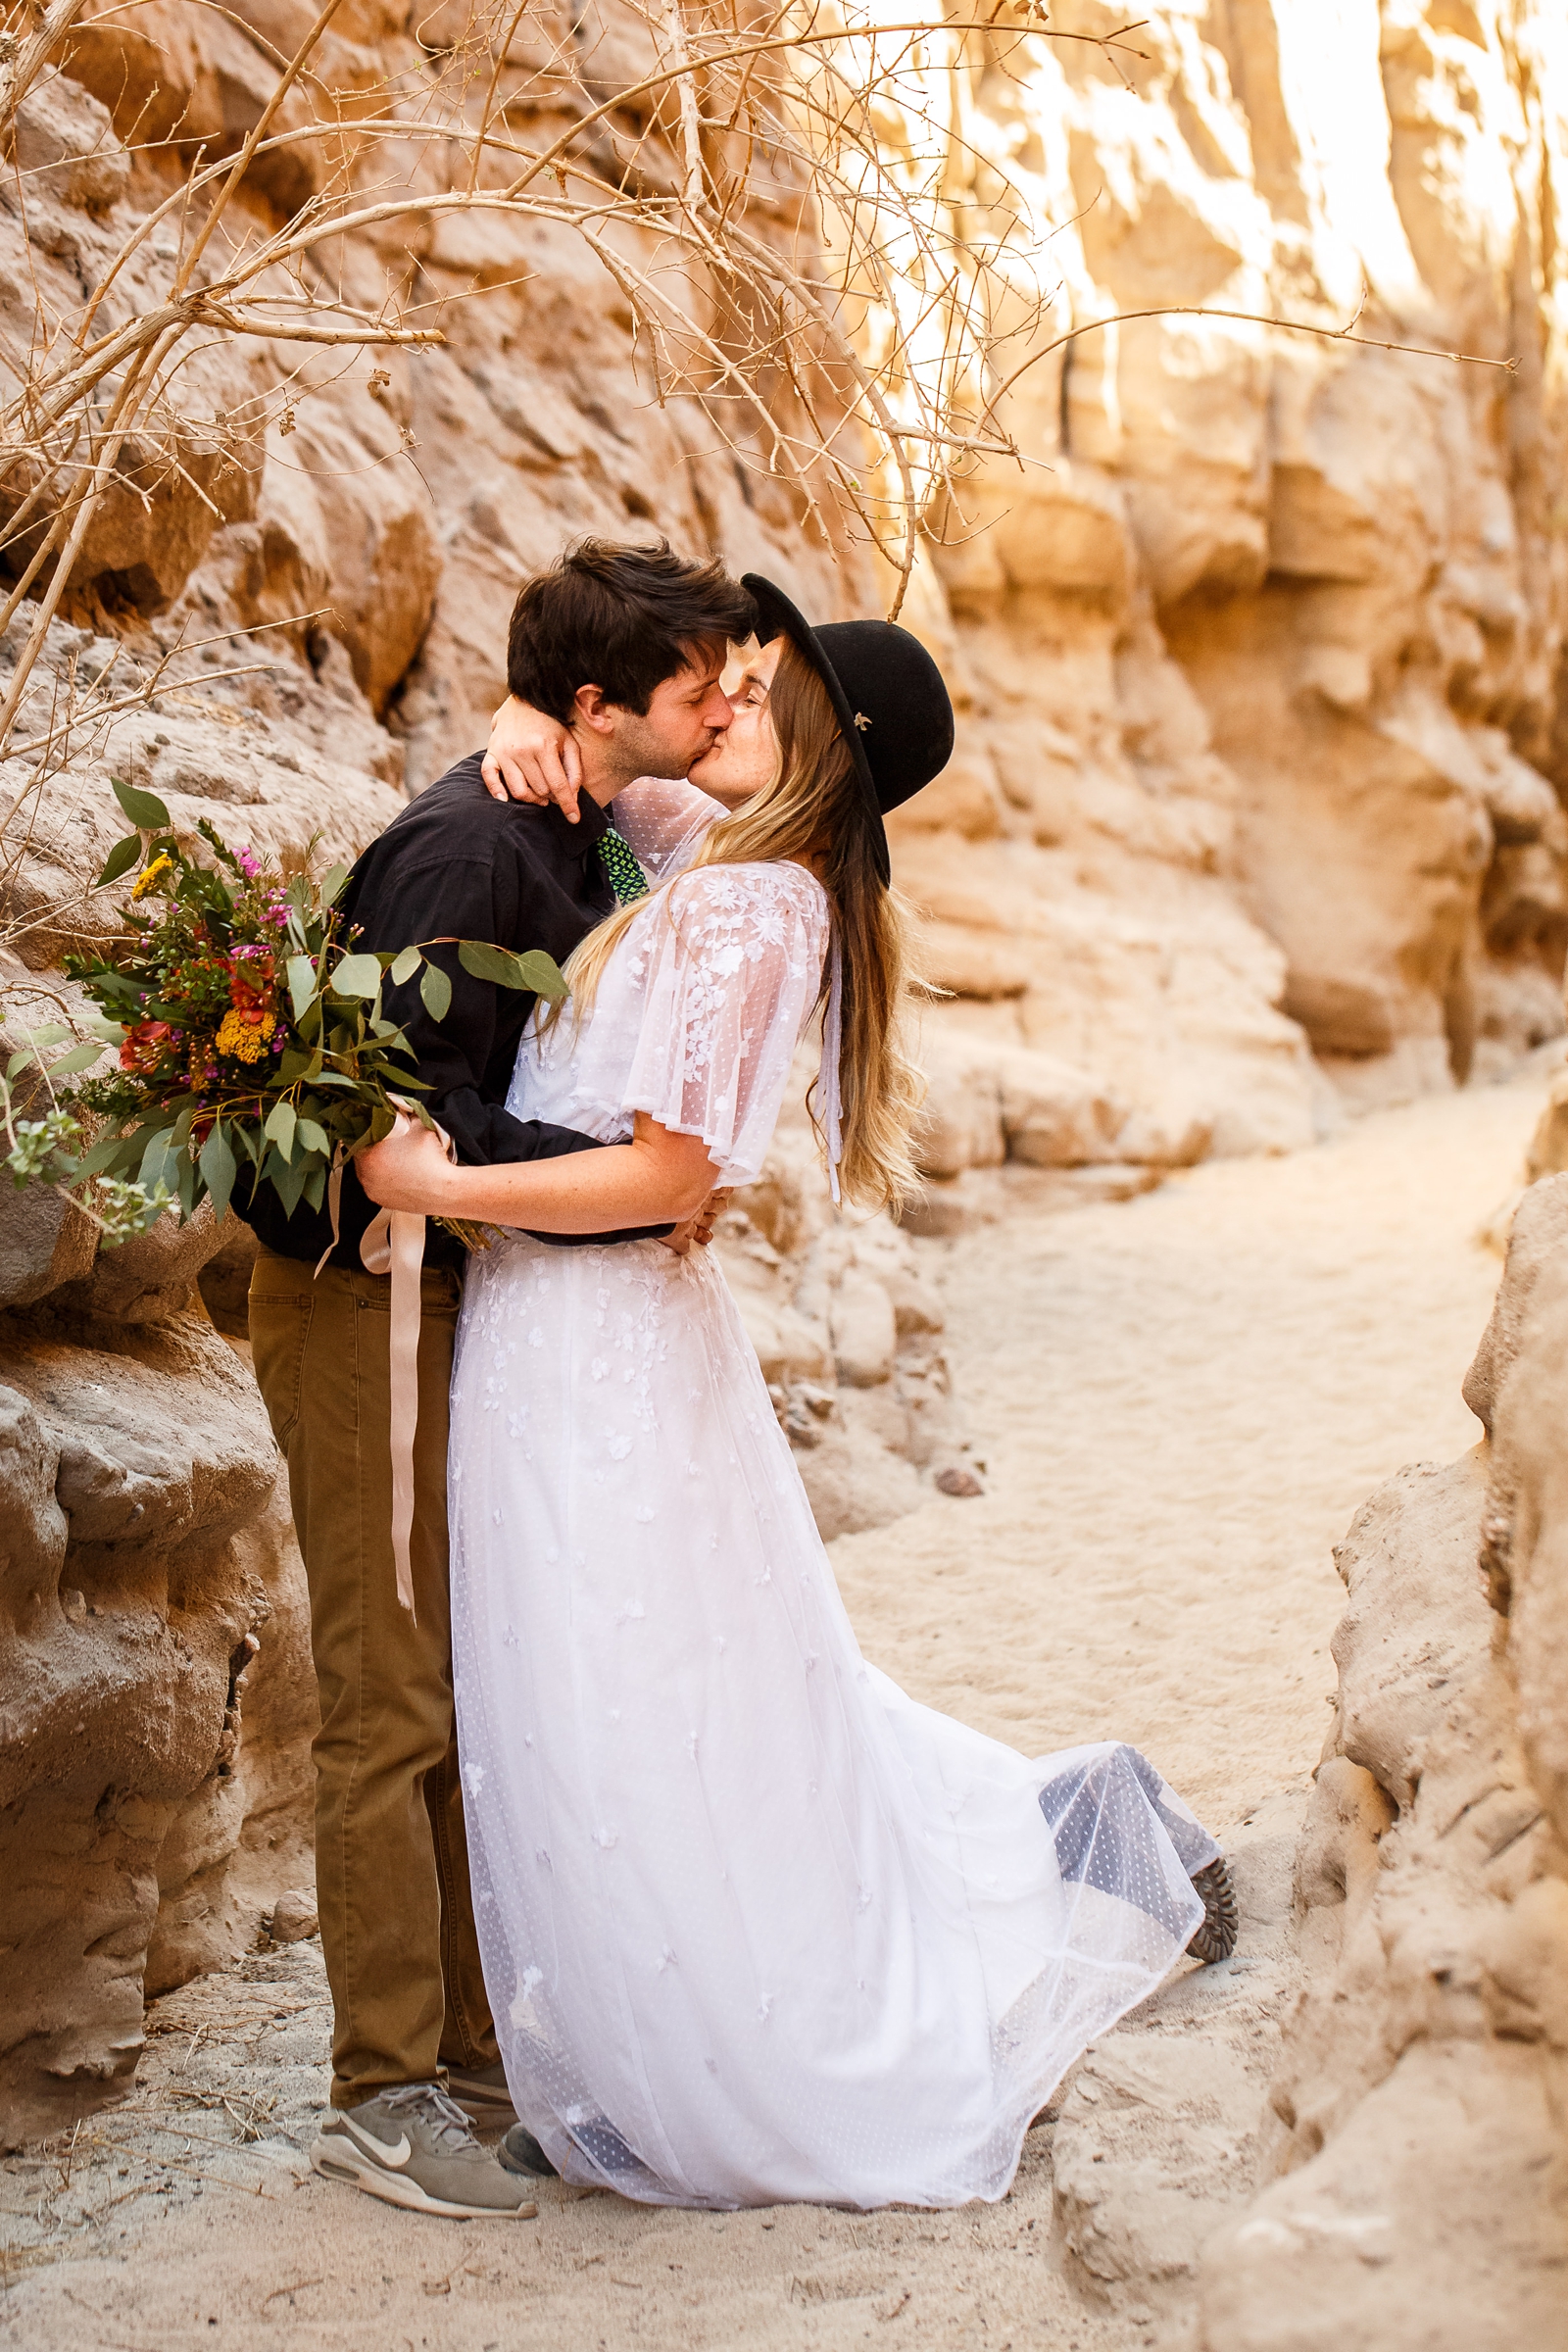 This couple share a unique slot canyon elopement in warm Southern California.